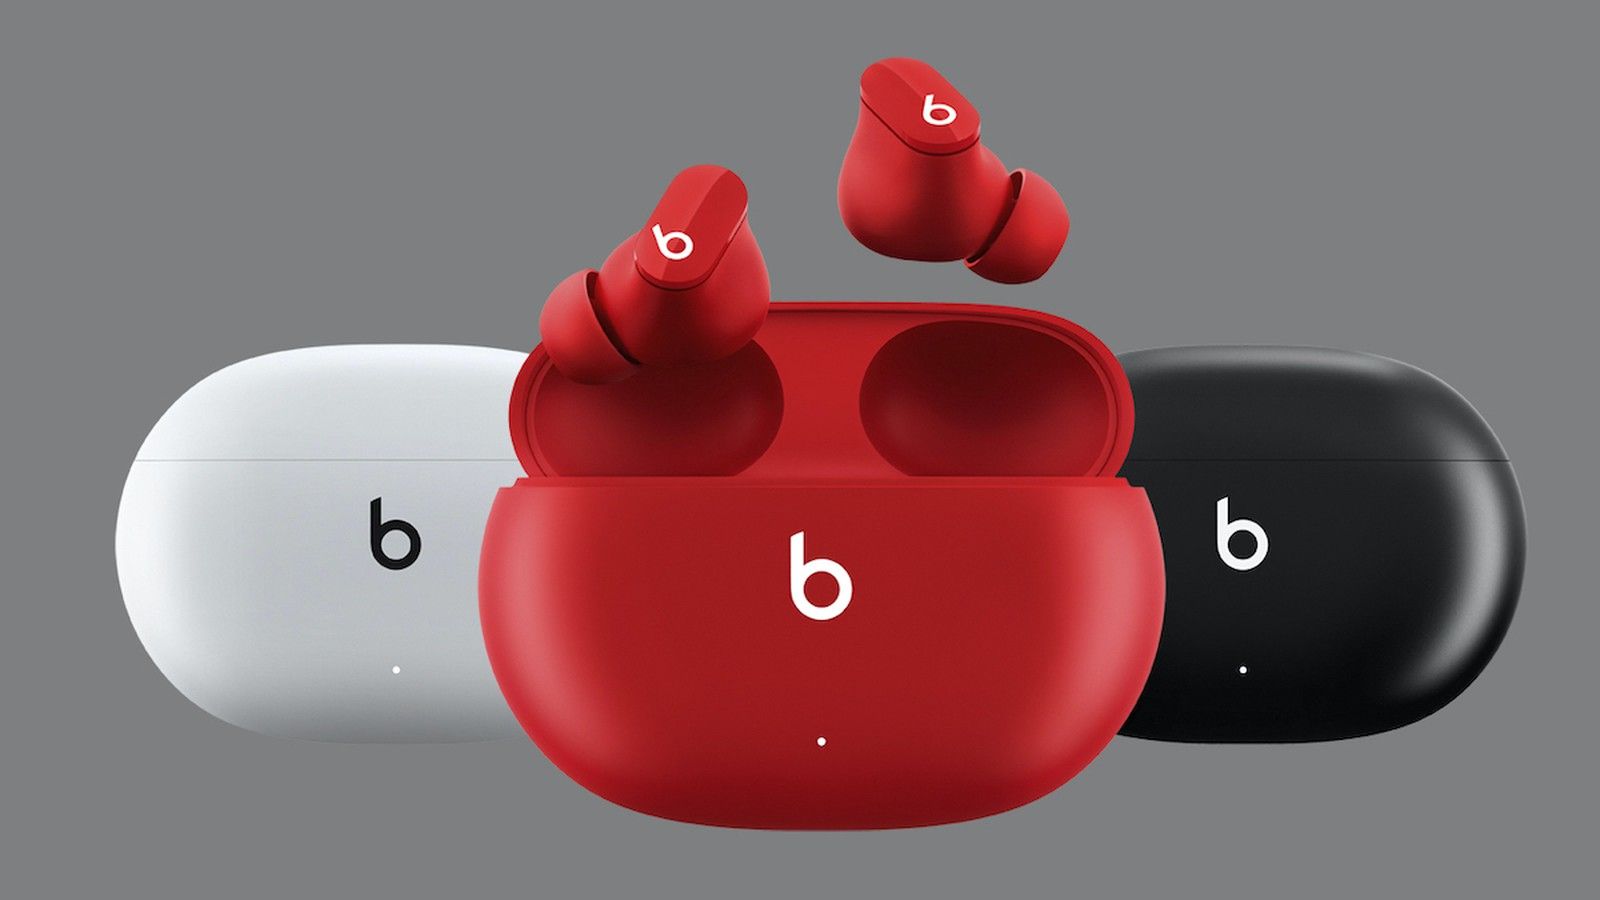 Bates Studio Bades headphones in three colors: red, black and white